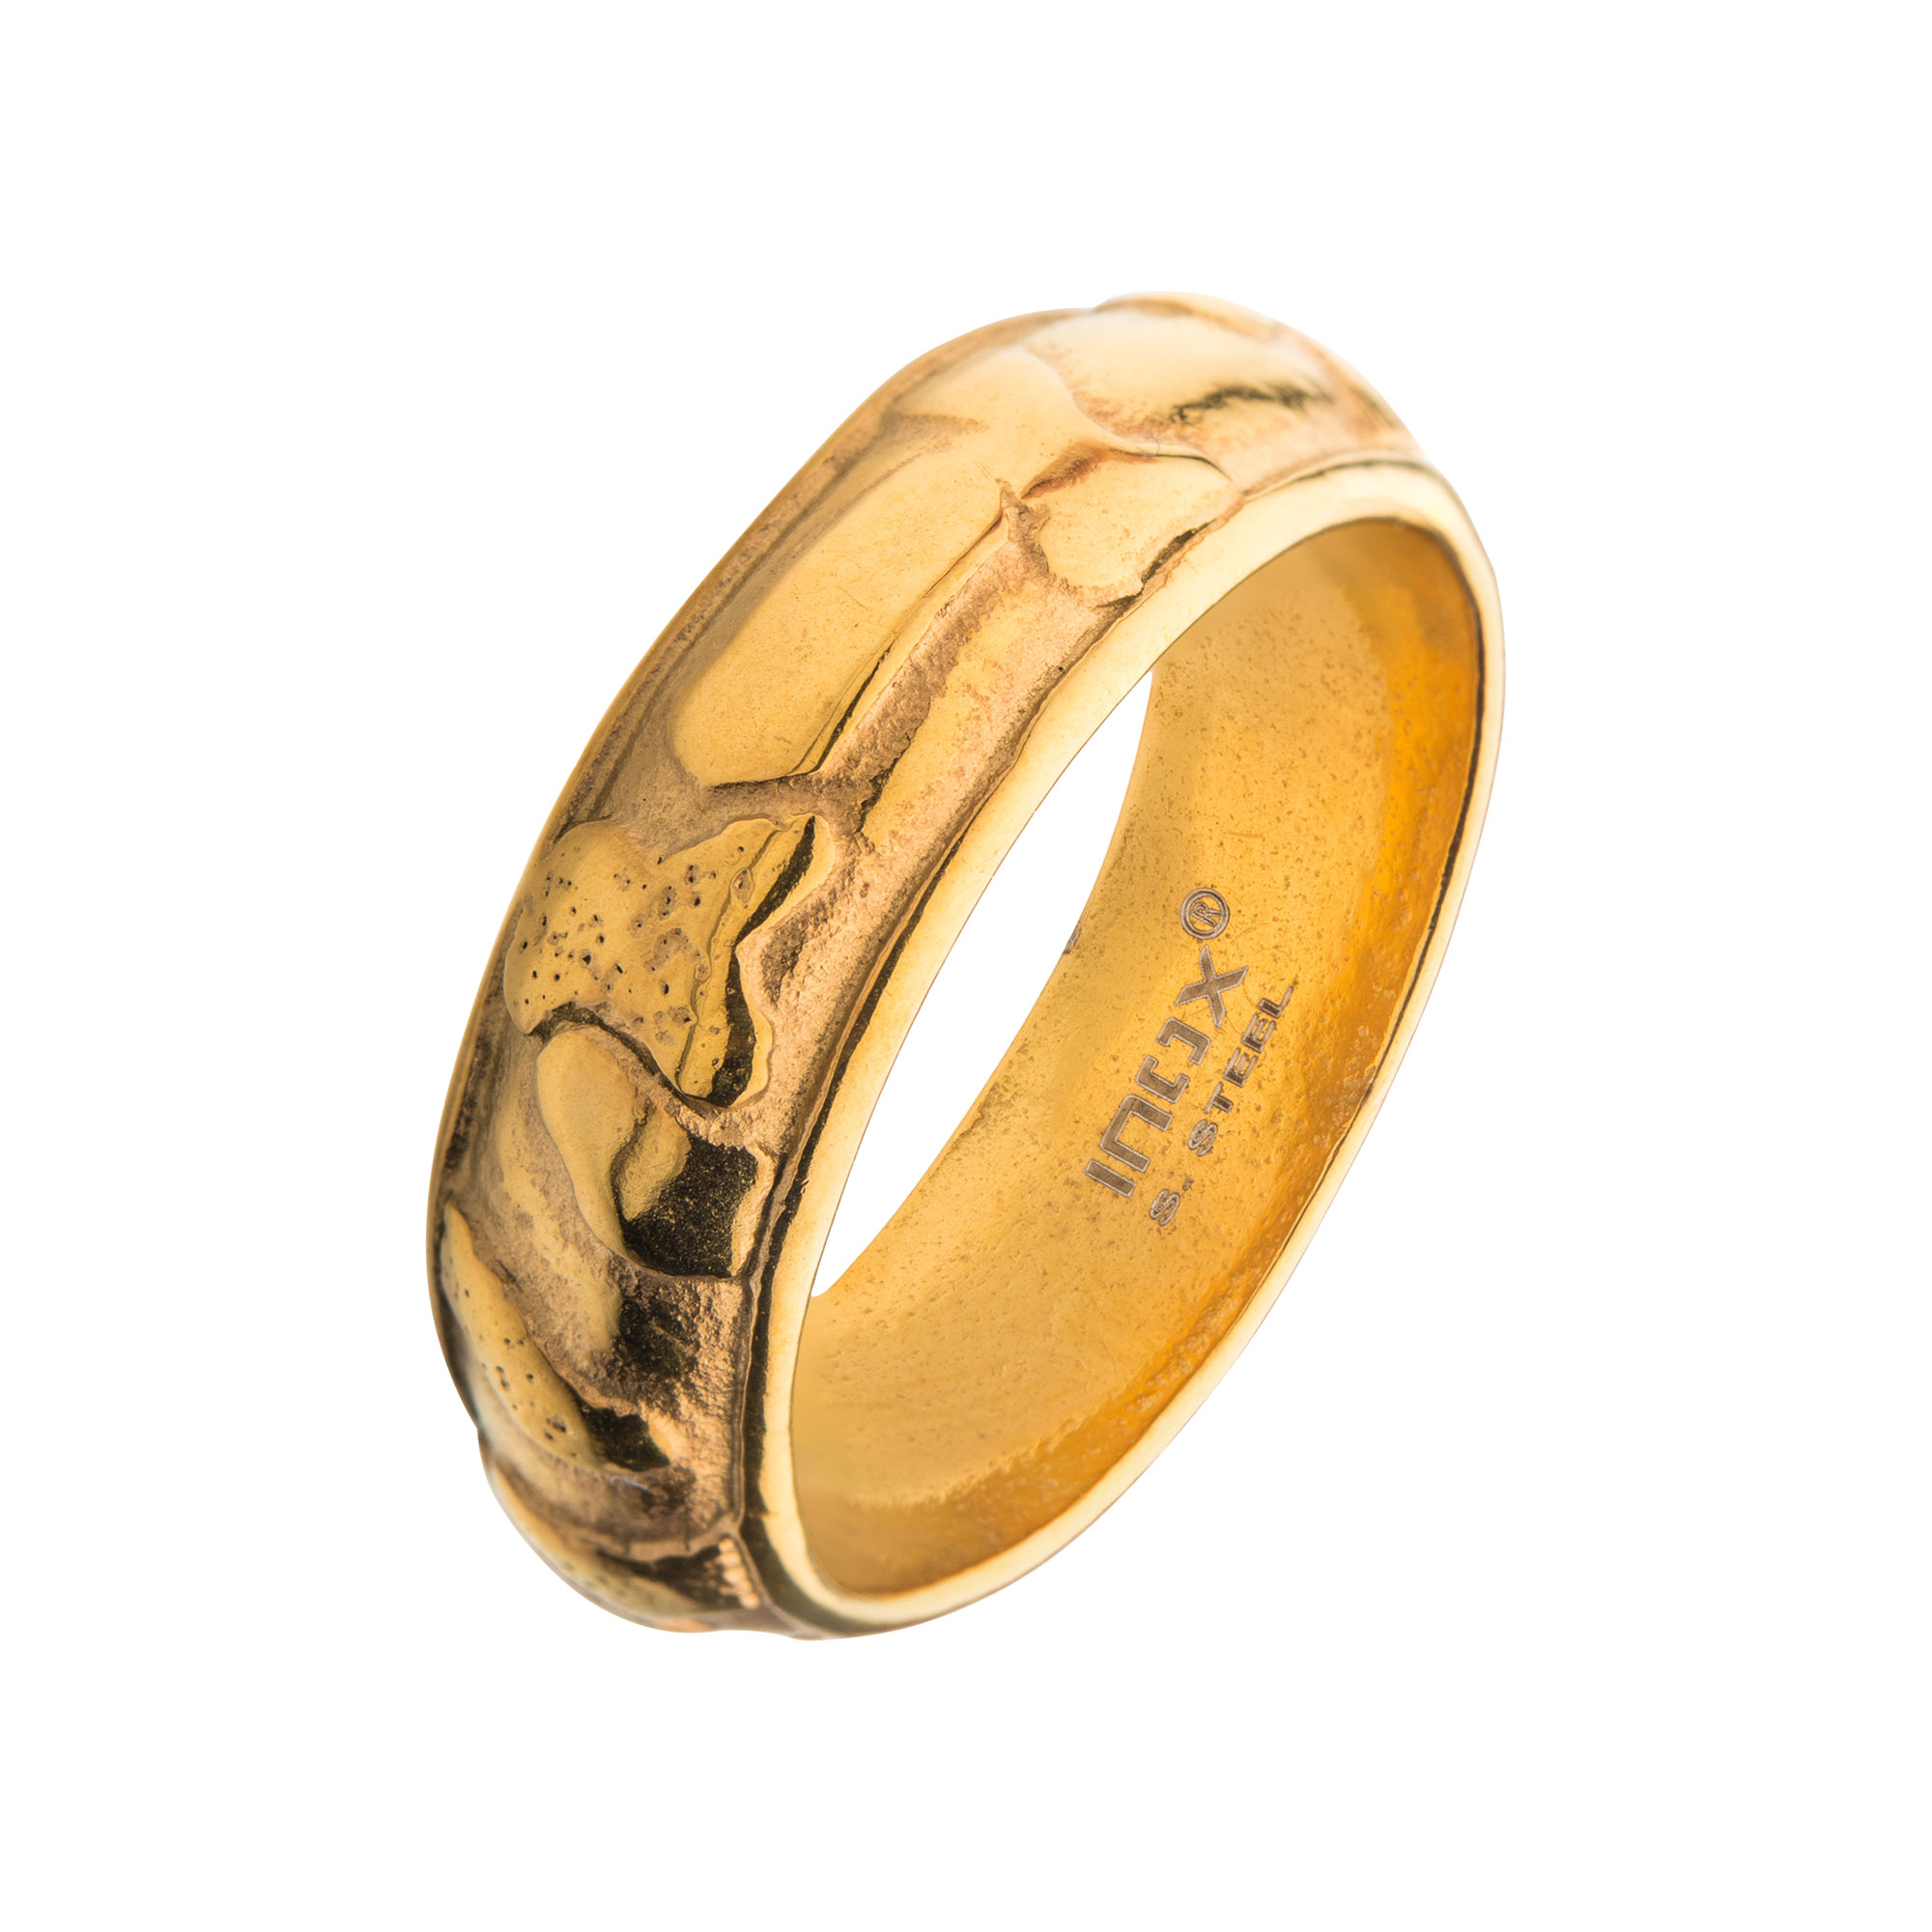 7.5mm Gold Plated 3D Canyon Pattern Ring P.K. Bennett Jewelers Mundelein, IL